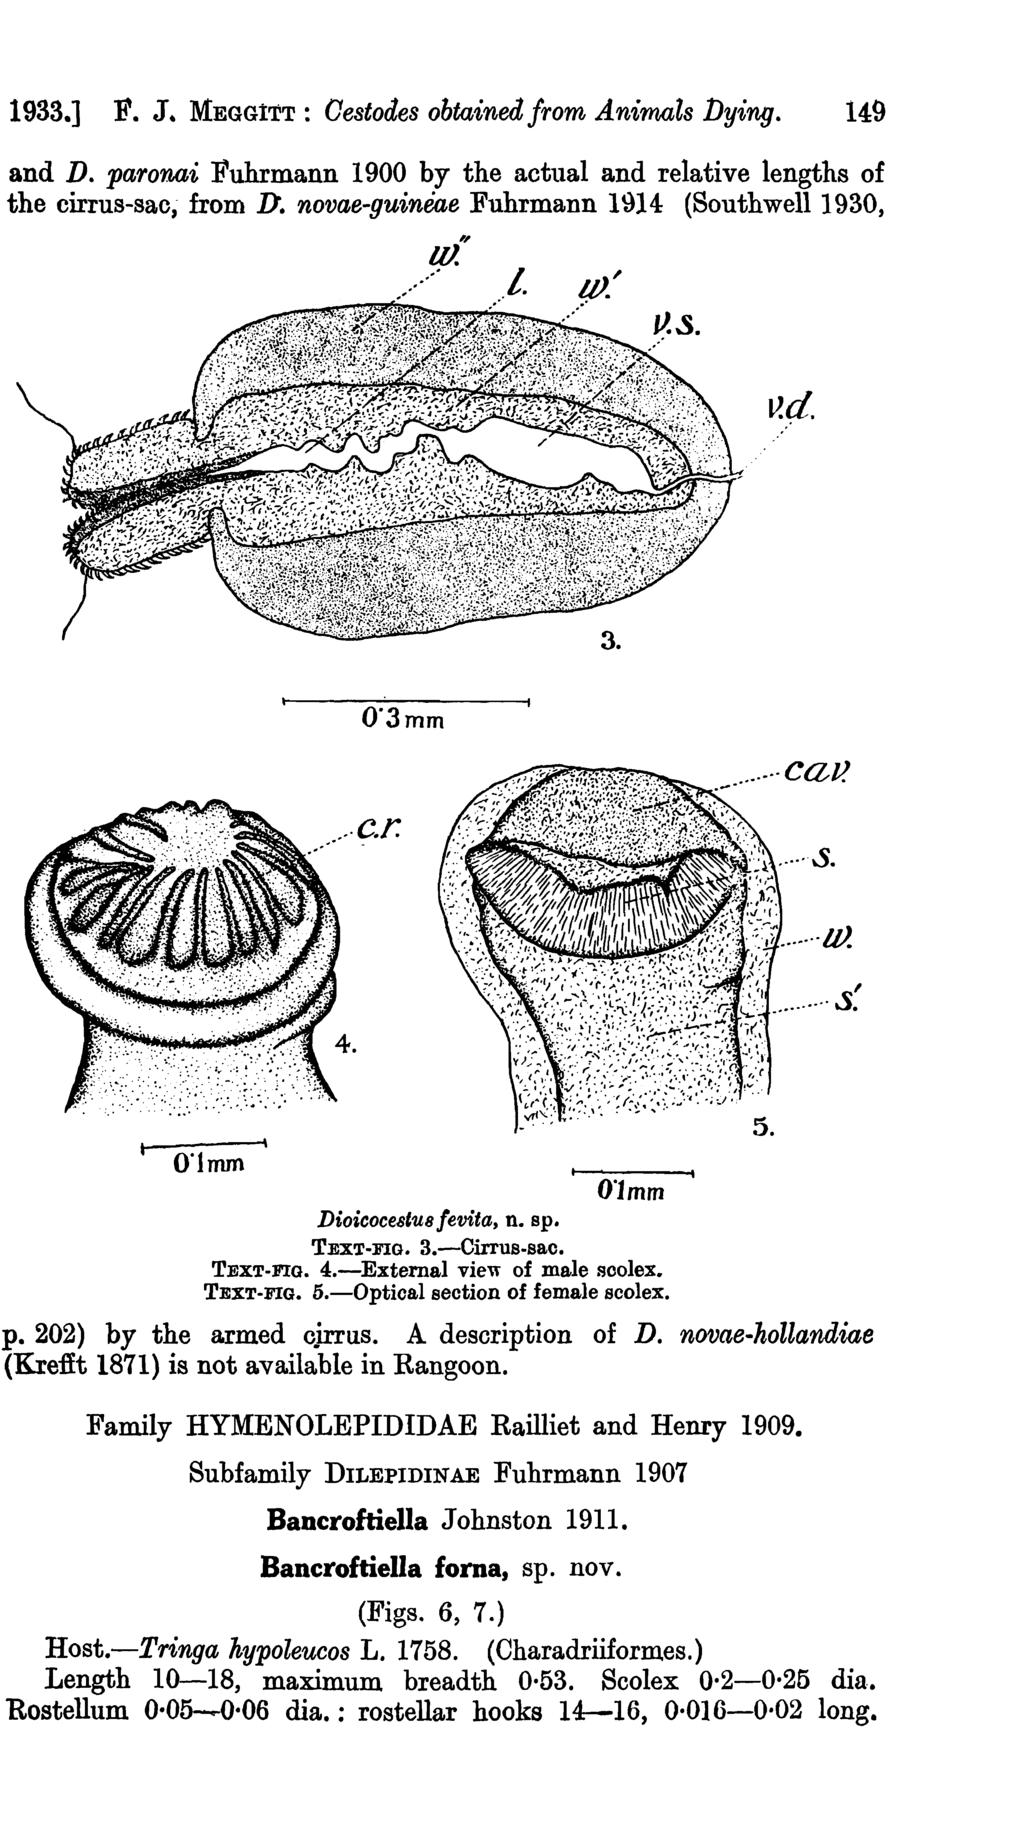 1933.] F. J. MEGG1TT: Oestodes obtained from Animals Dying. 149 and D. paronai Fuhrmann 1900 by the actual and relative lengths of the cirrus-sac; from D.